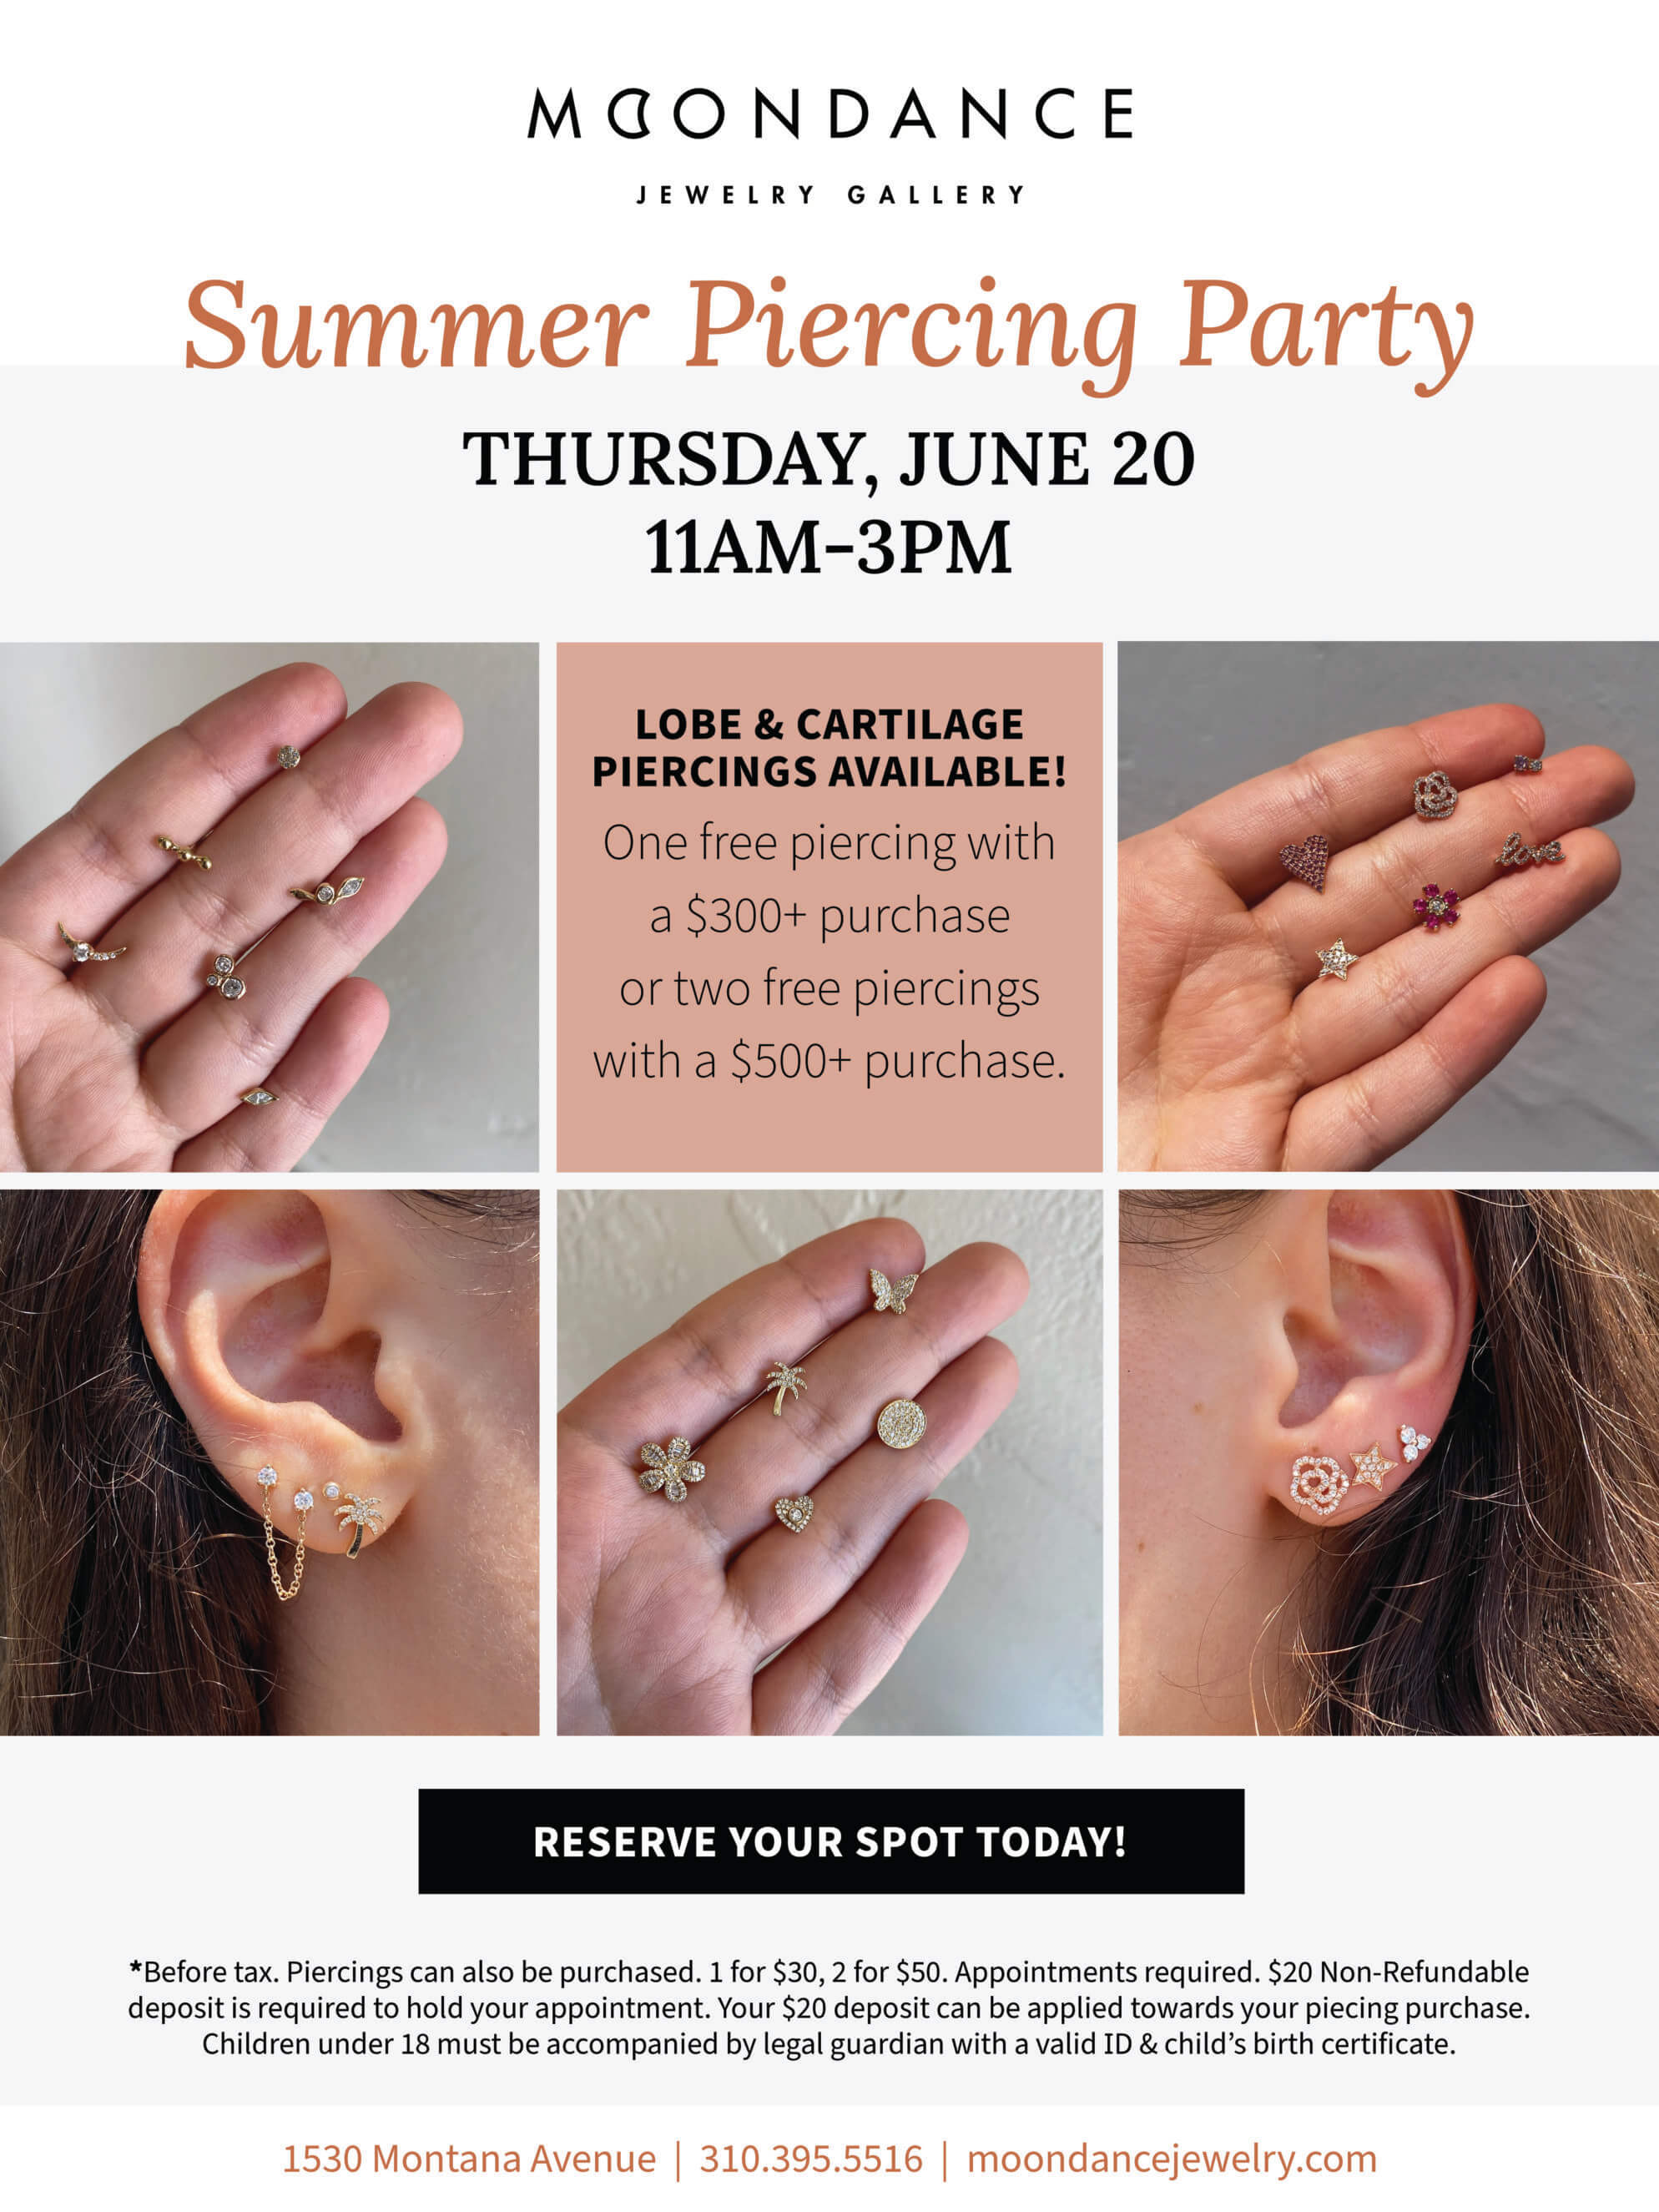 Summer Piercing Party Flyer for Moondance Jewelry Gallery